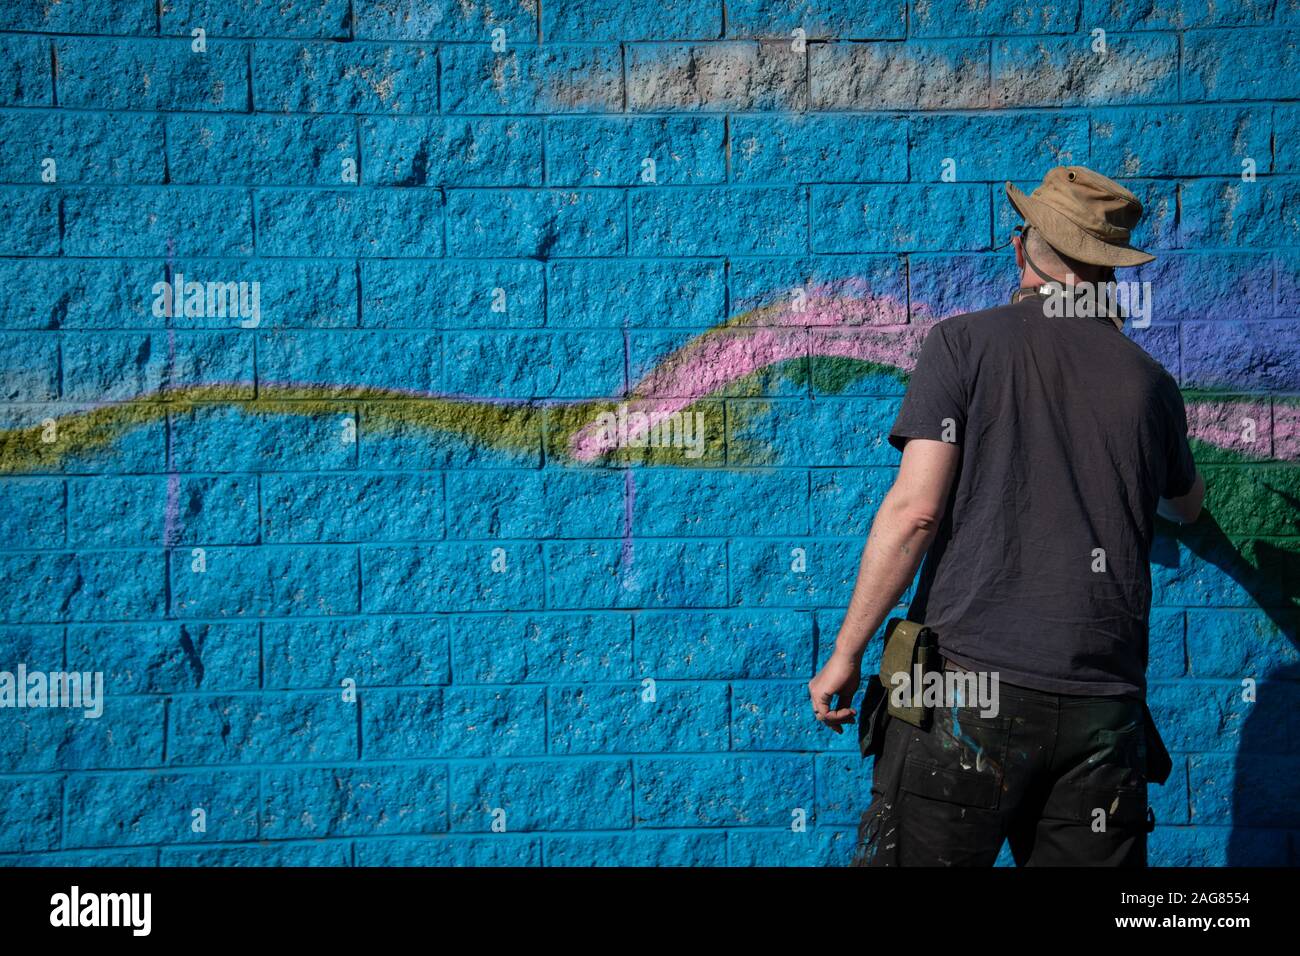 Ebbw Vale, UK - September 13, 2019: Graffiti artist painting building wall art with spray paints for the owl sanctuary for the town in Ebbw Vale, Wale Stock Photo